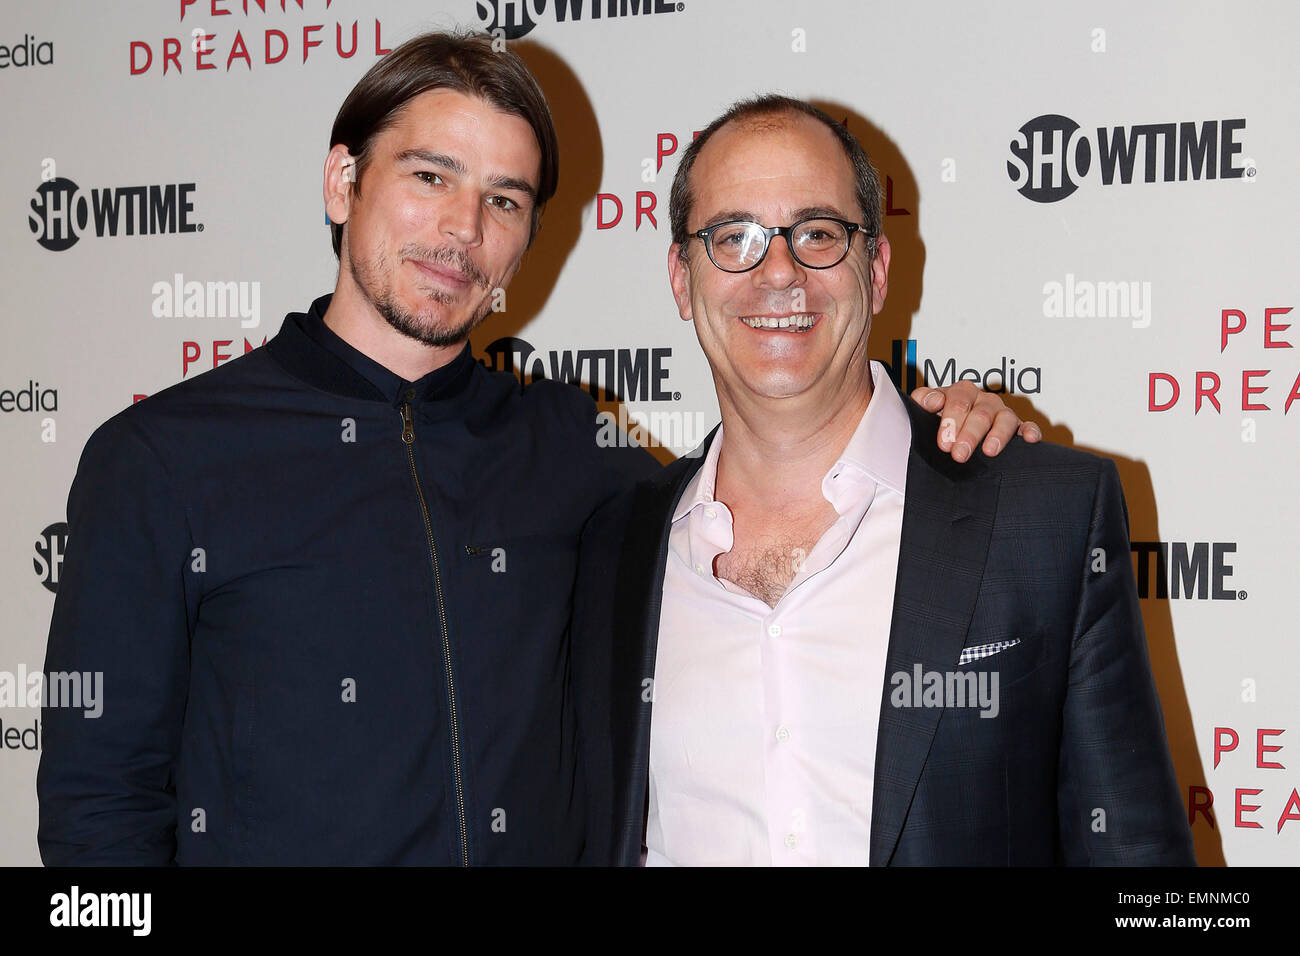 Toronto, Canada. 21st April, 2015. Actor Josh Hartnett and David Nevins arrive for Penny Dreadful Season 2 premiere at TIFF Bell Lightbox. Credit:  EXImages/Alamy Live News Stock Photo